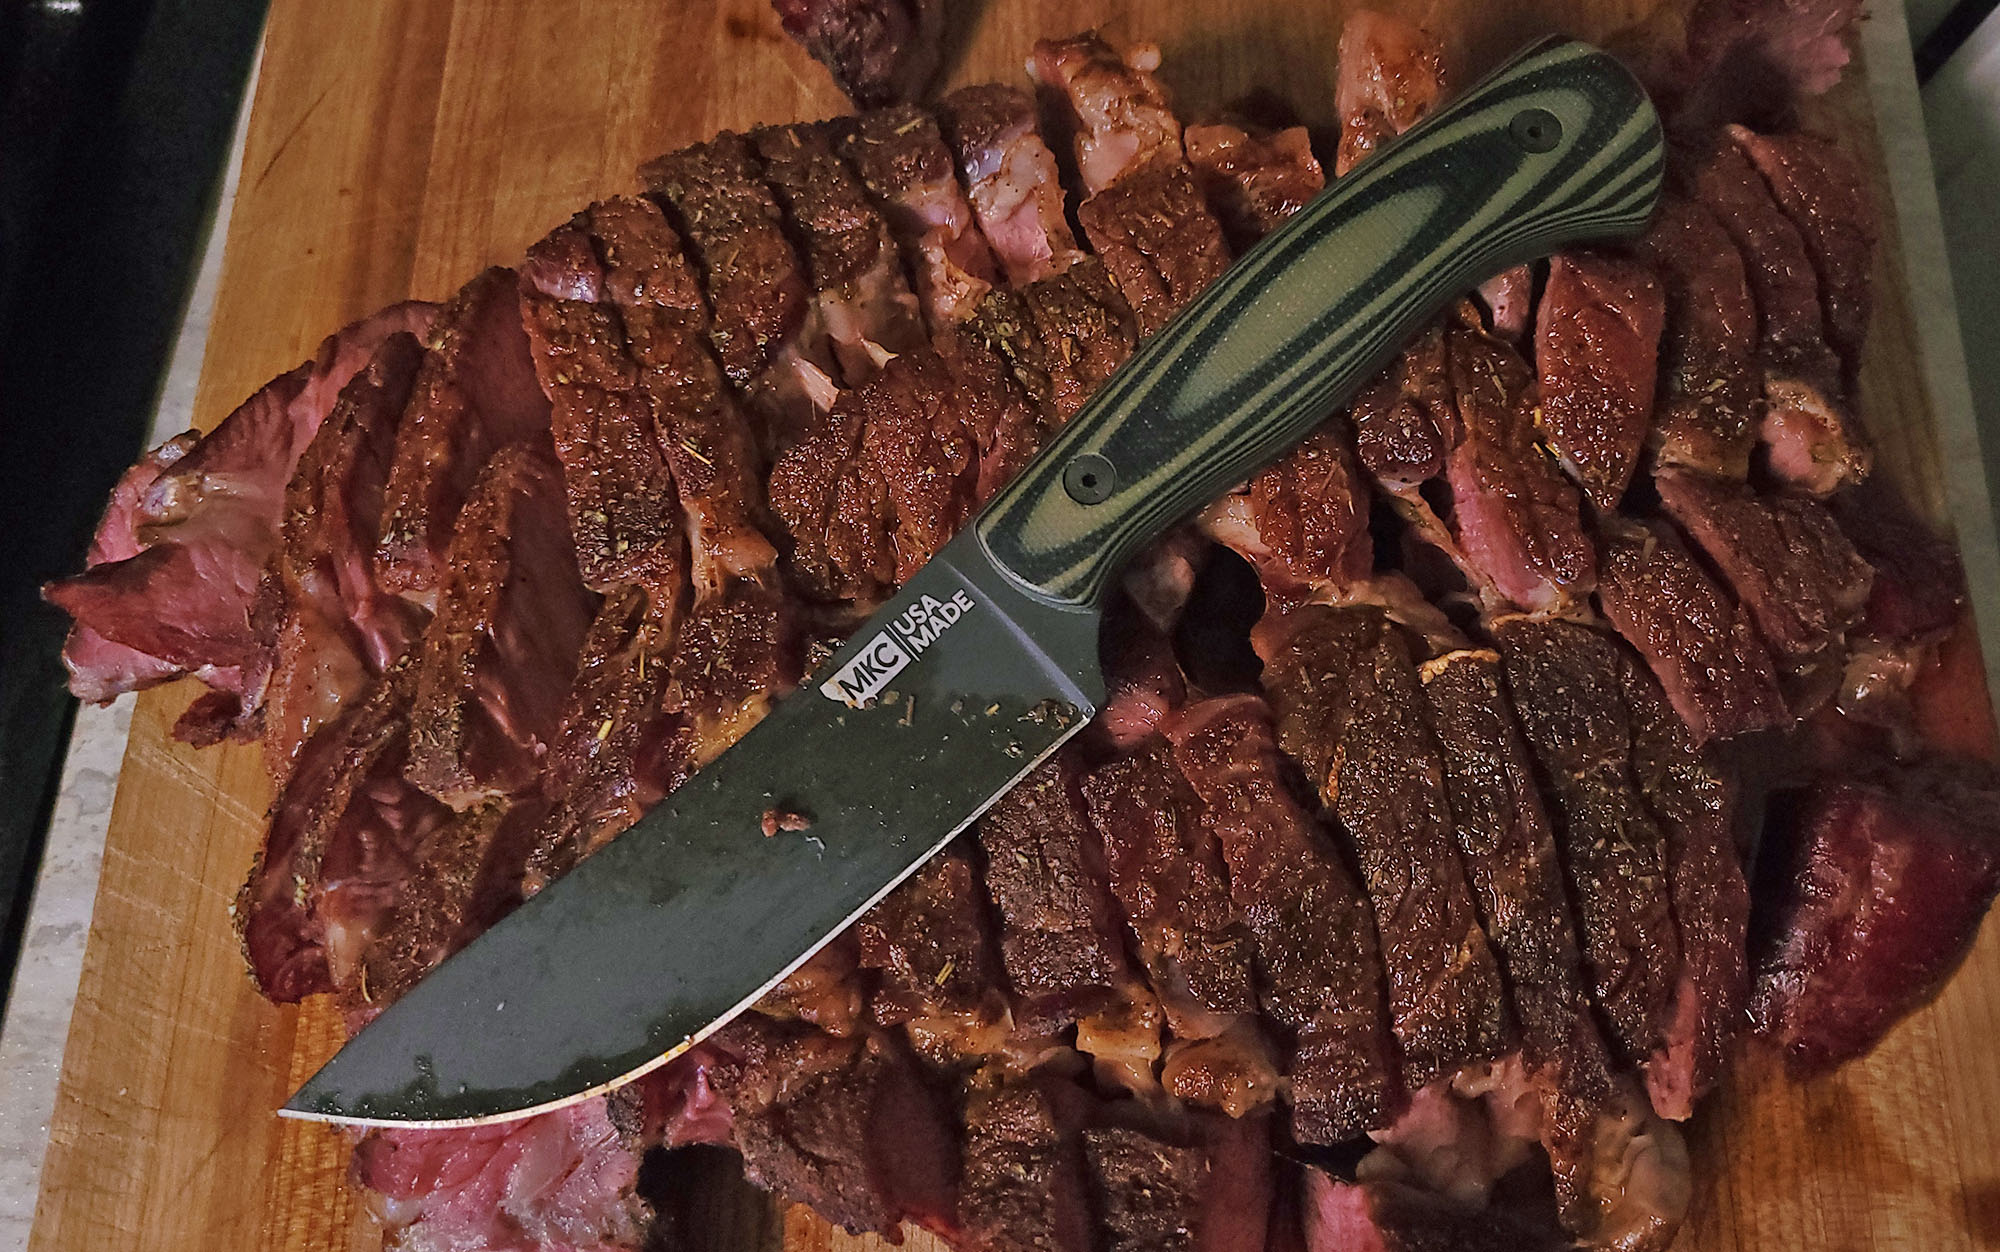 We cut meat with the MKC Super Cub.